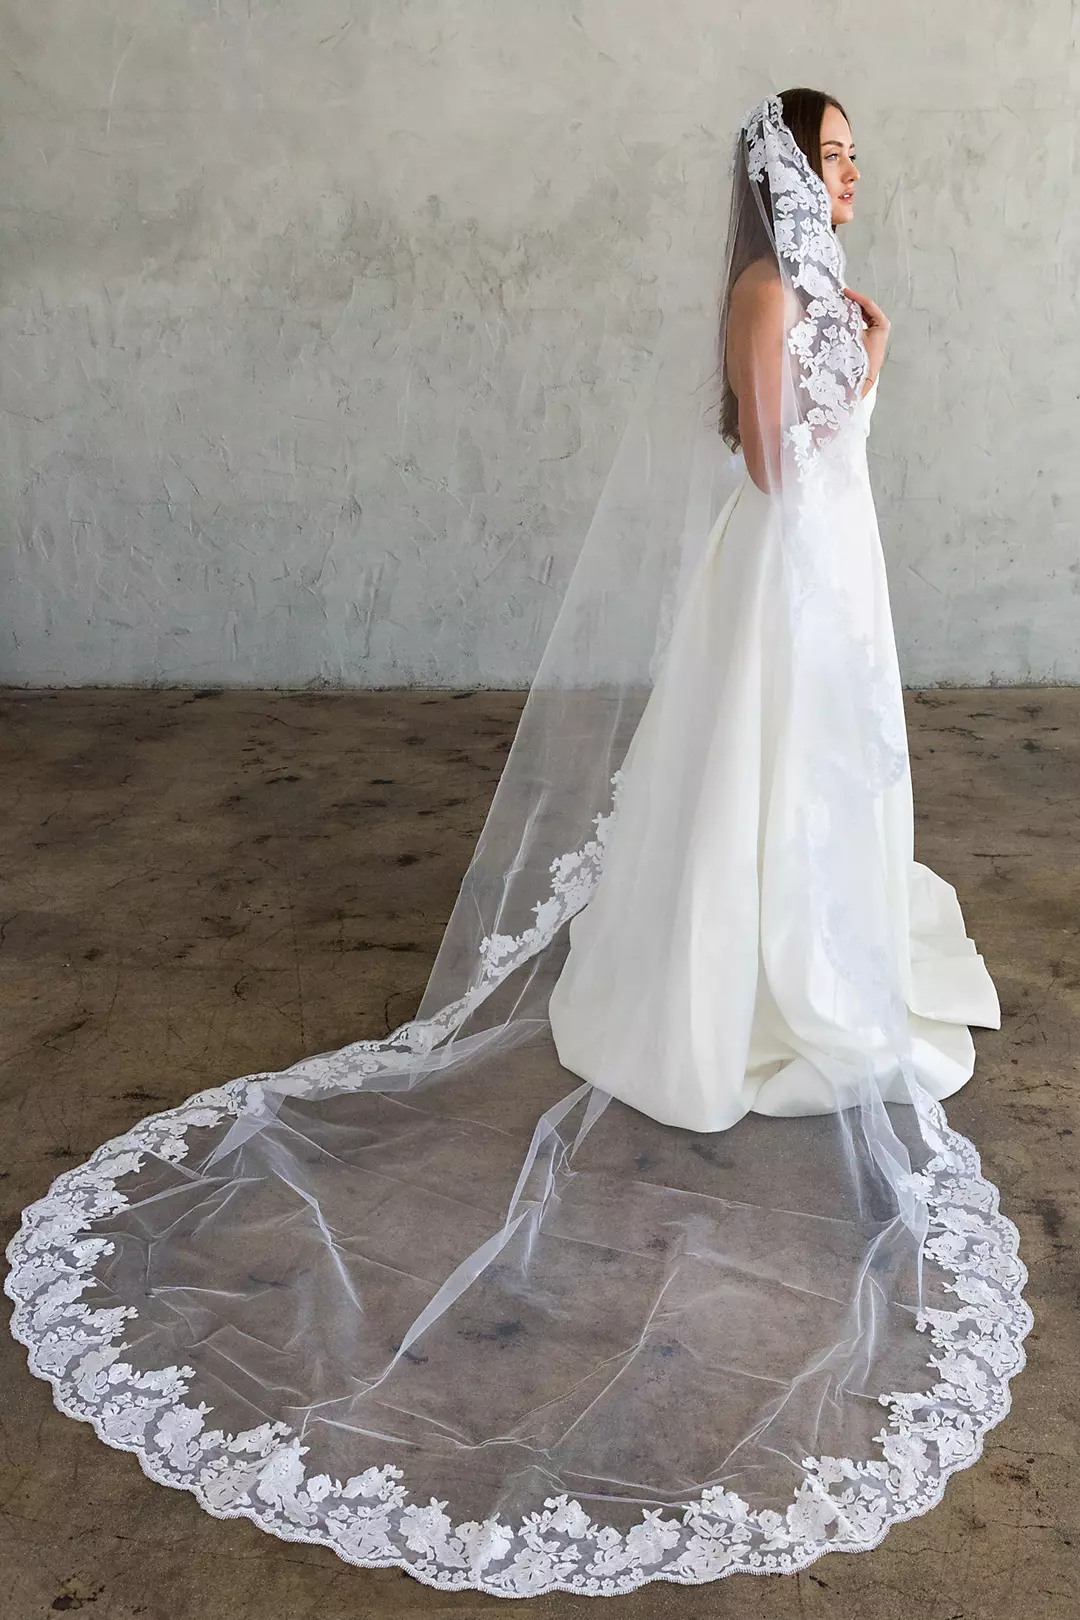 Hand-Sewn Wide Floral Lace Cathedral Veil Image